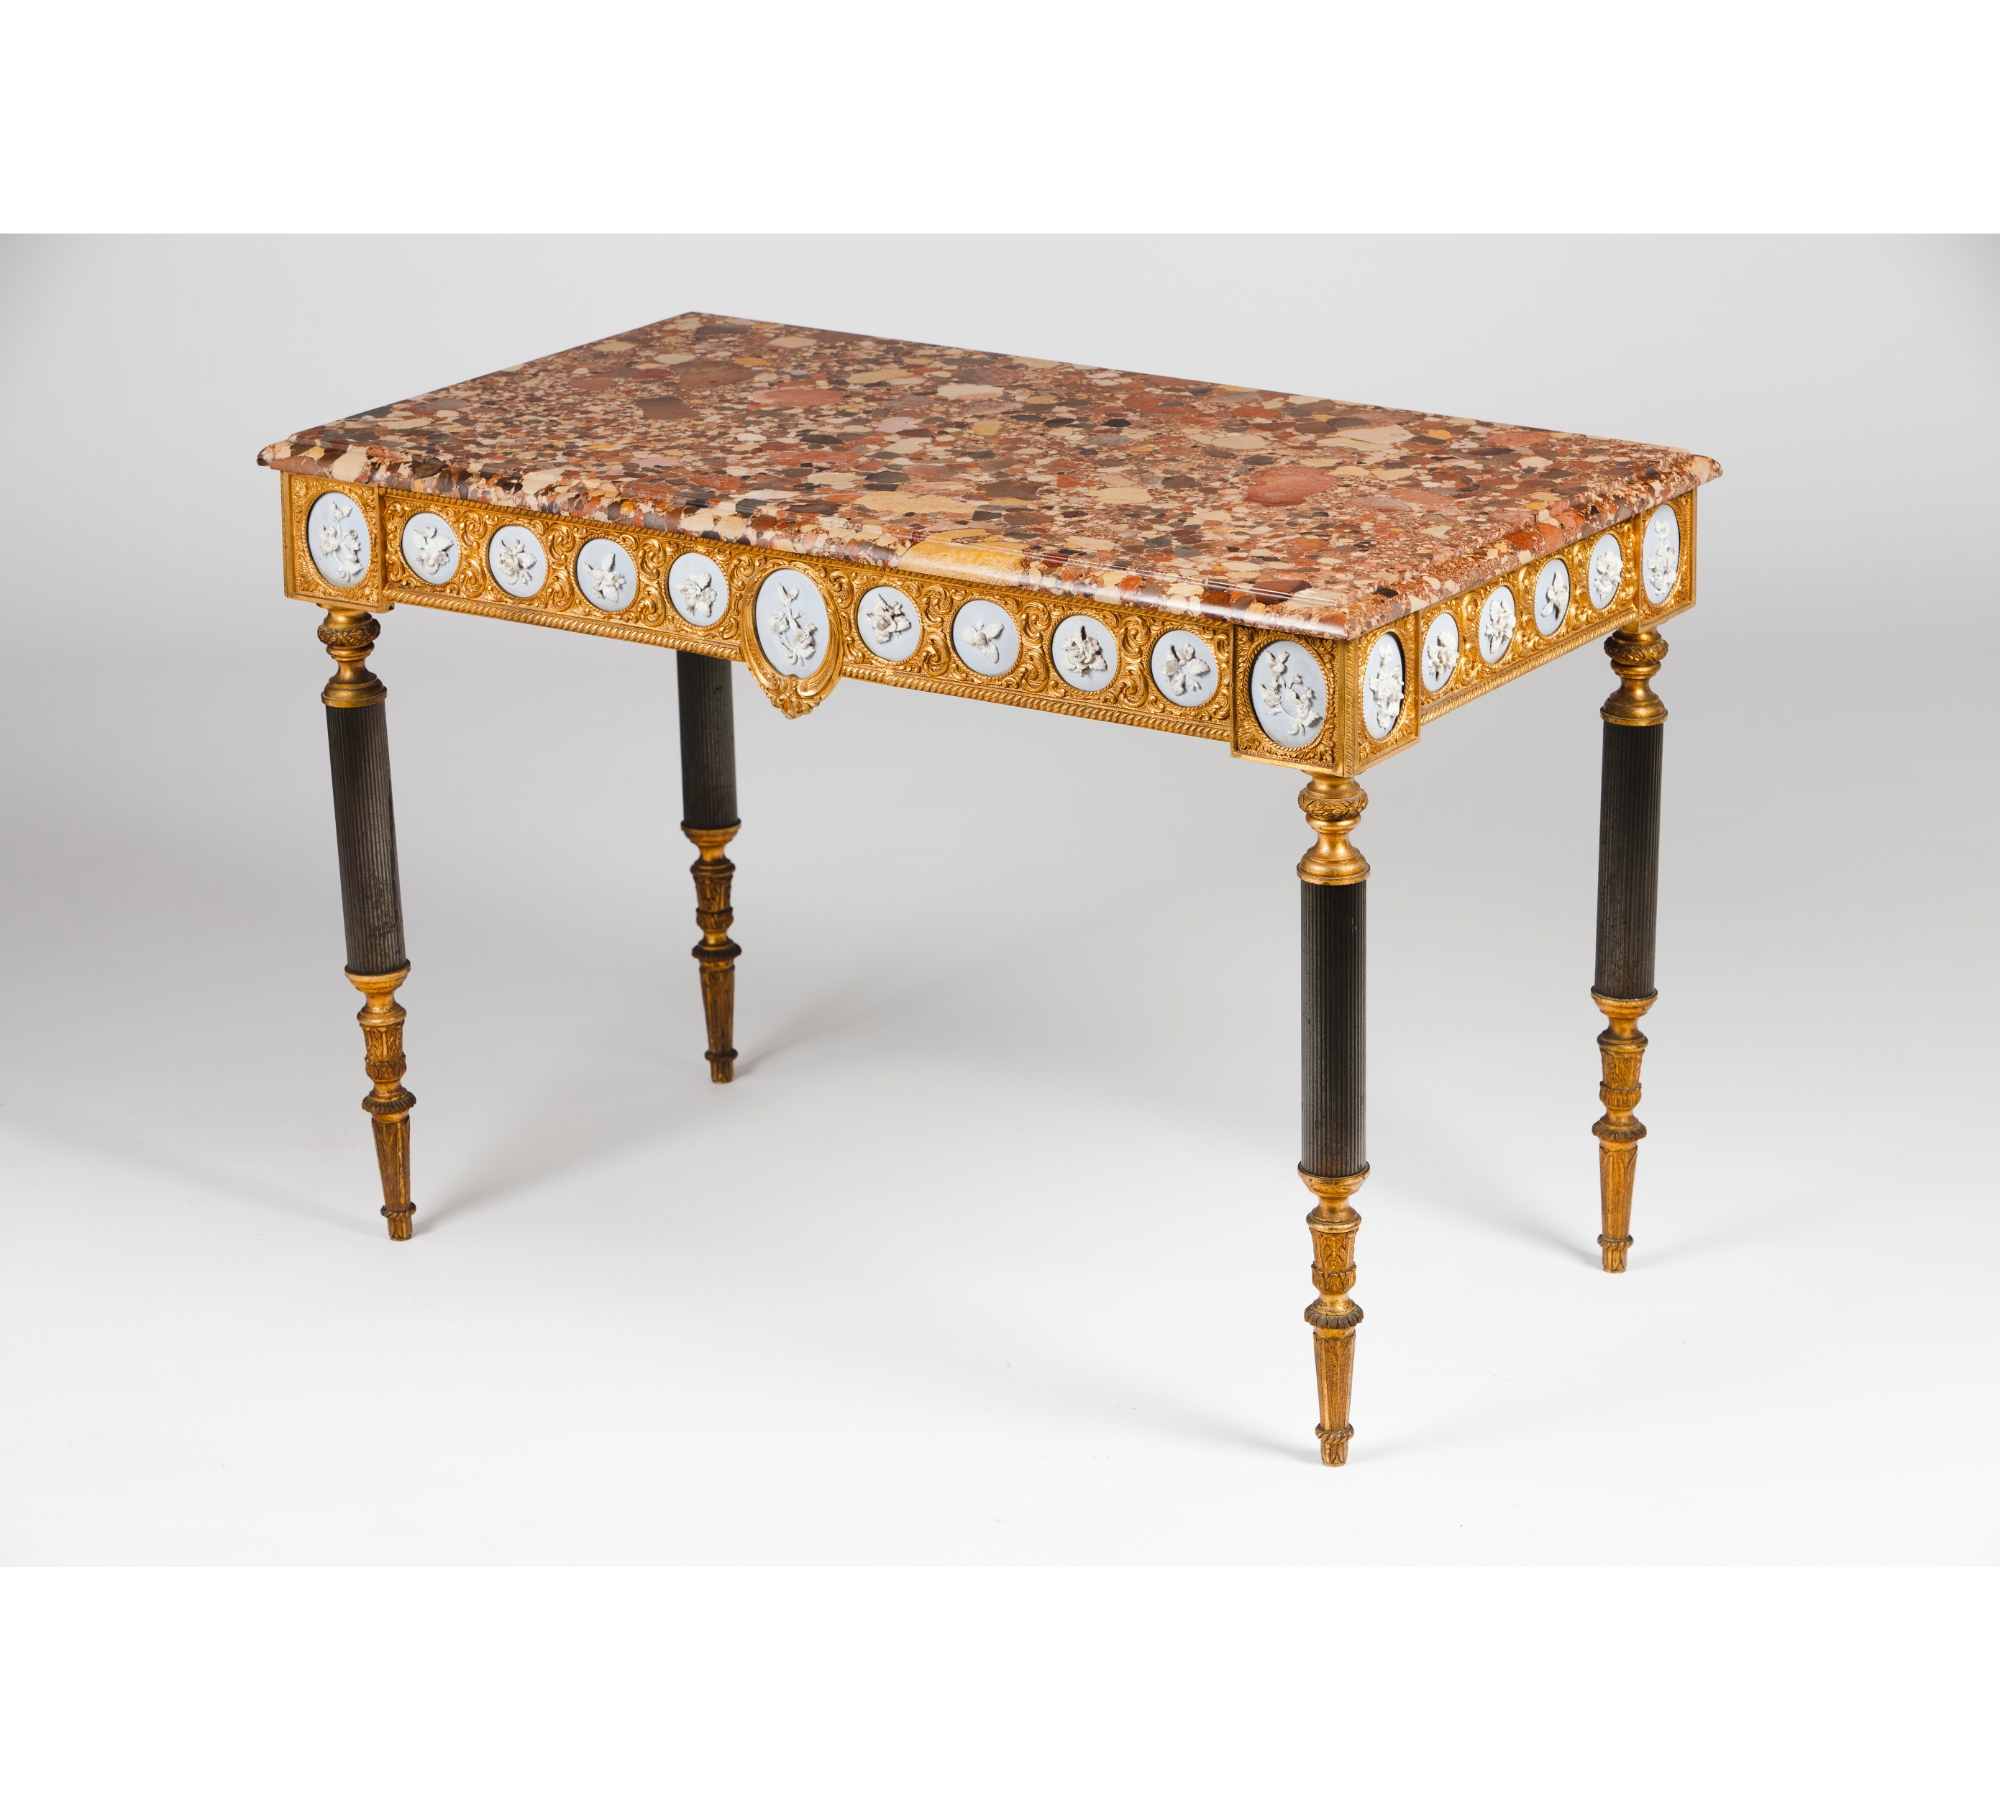 A neoclassical style side table